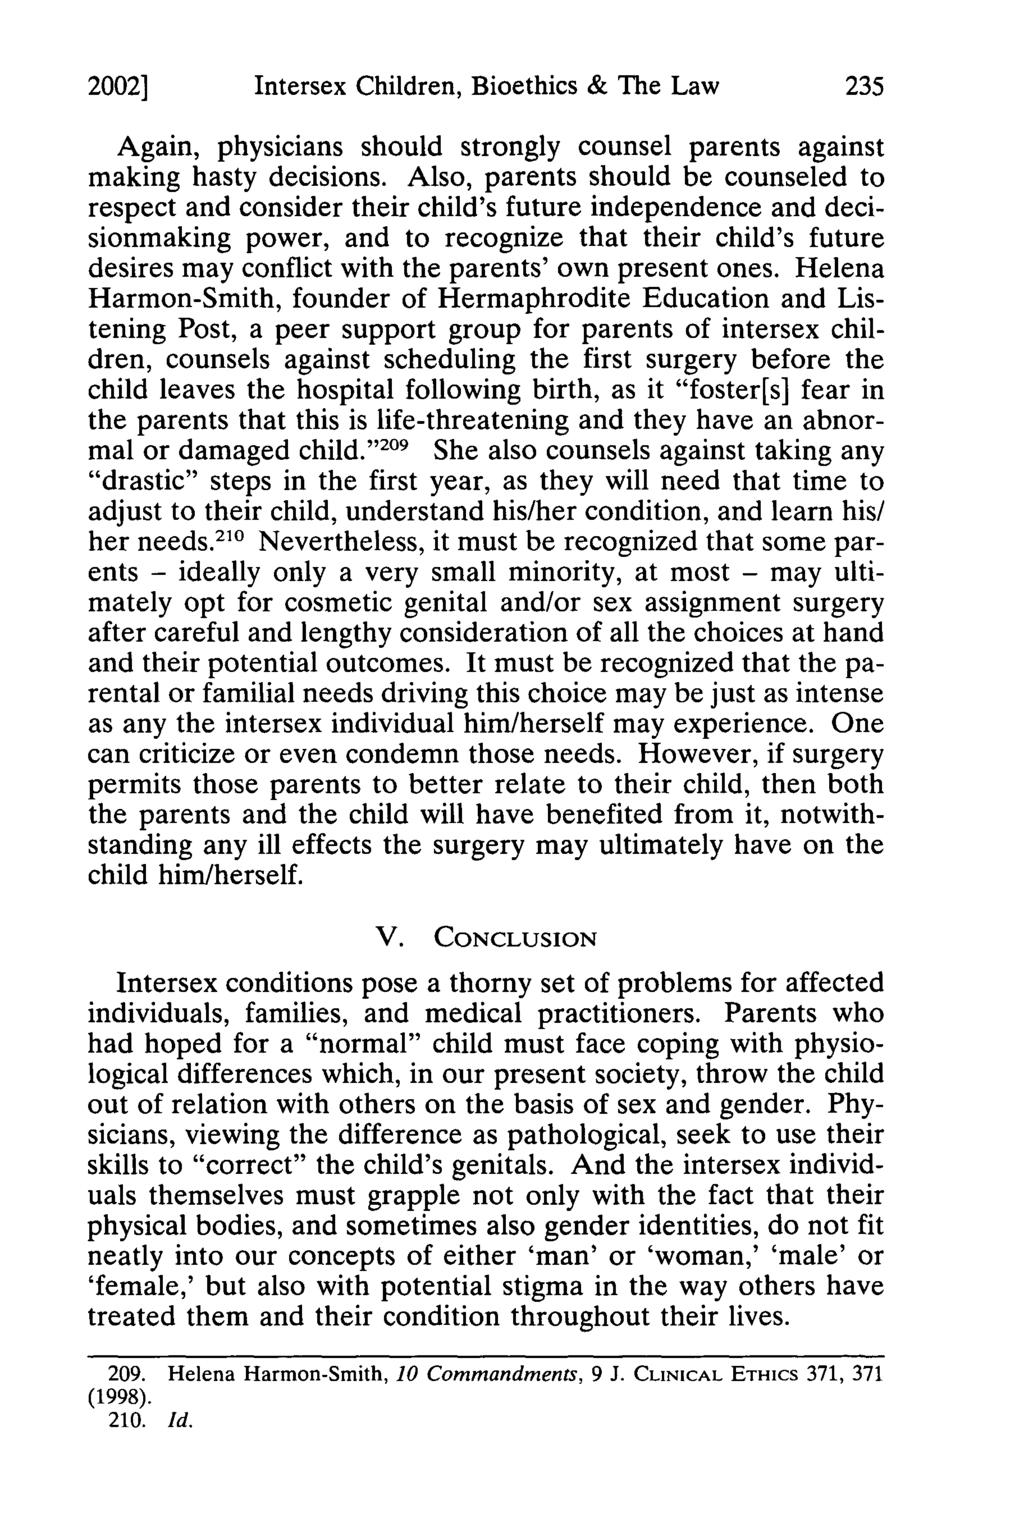 2002] Hermer: Paradigms Revised: Intersex Children, Bioethics & the Law Intersex Children, Bioethics & The Law Again, physicians should strongly counsel parents against making hasty decisions.